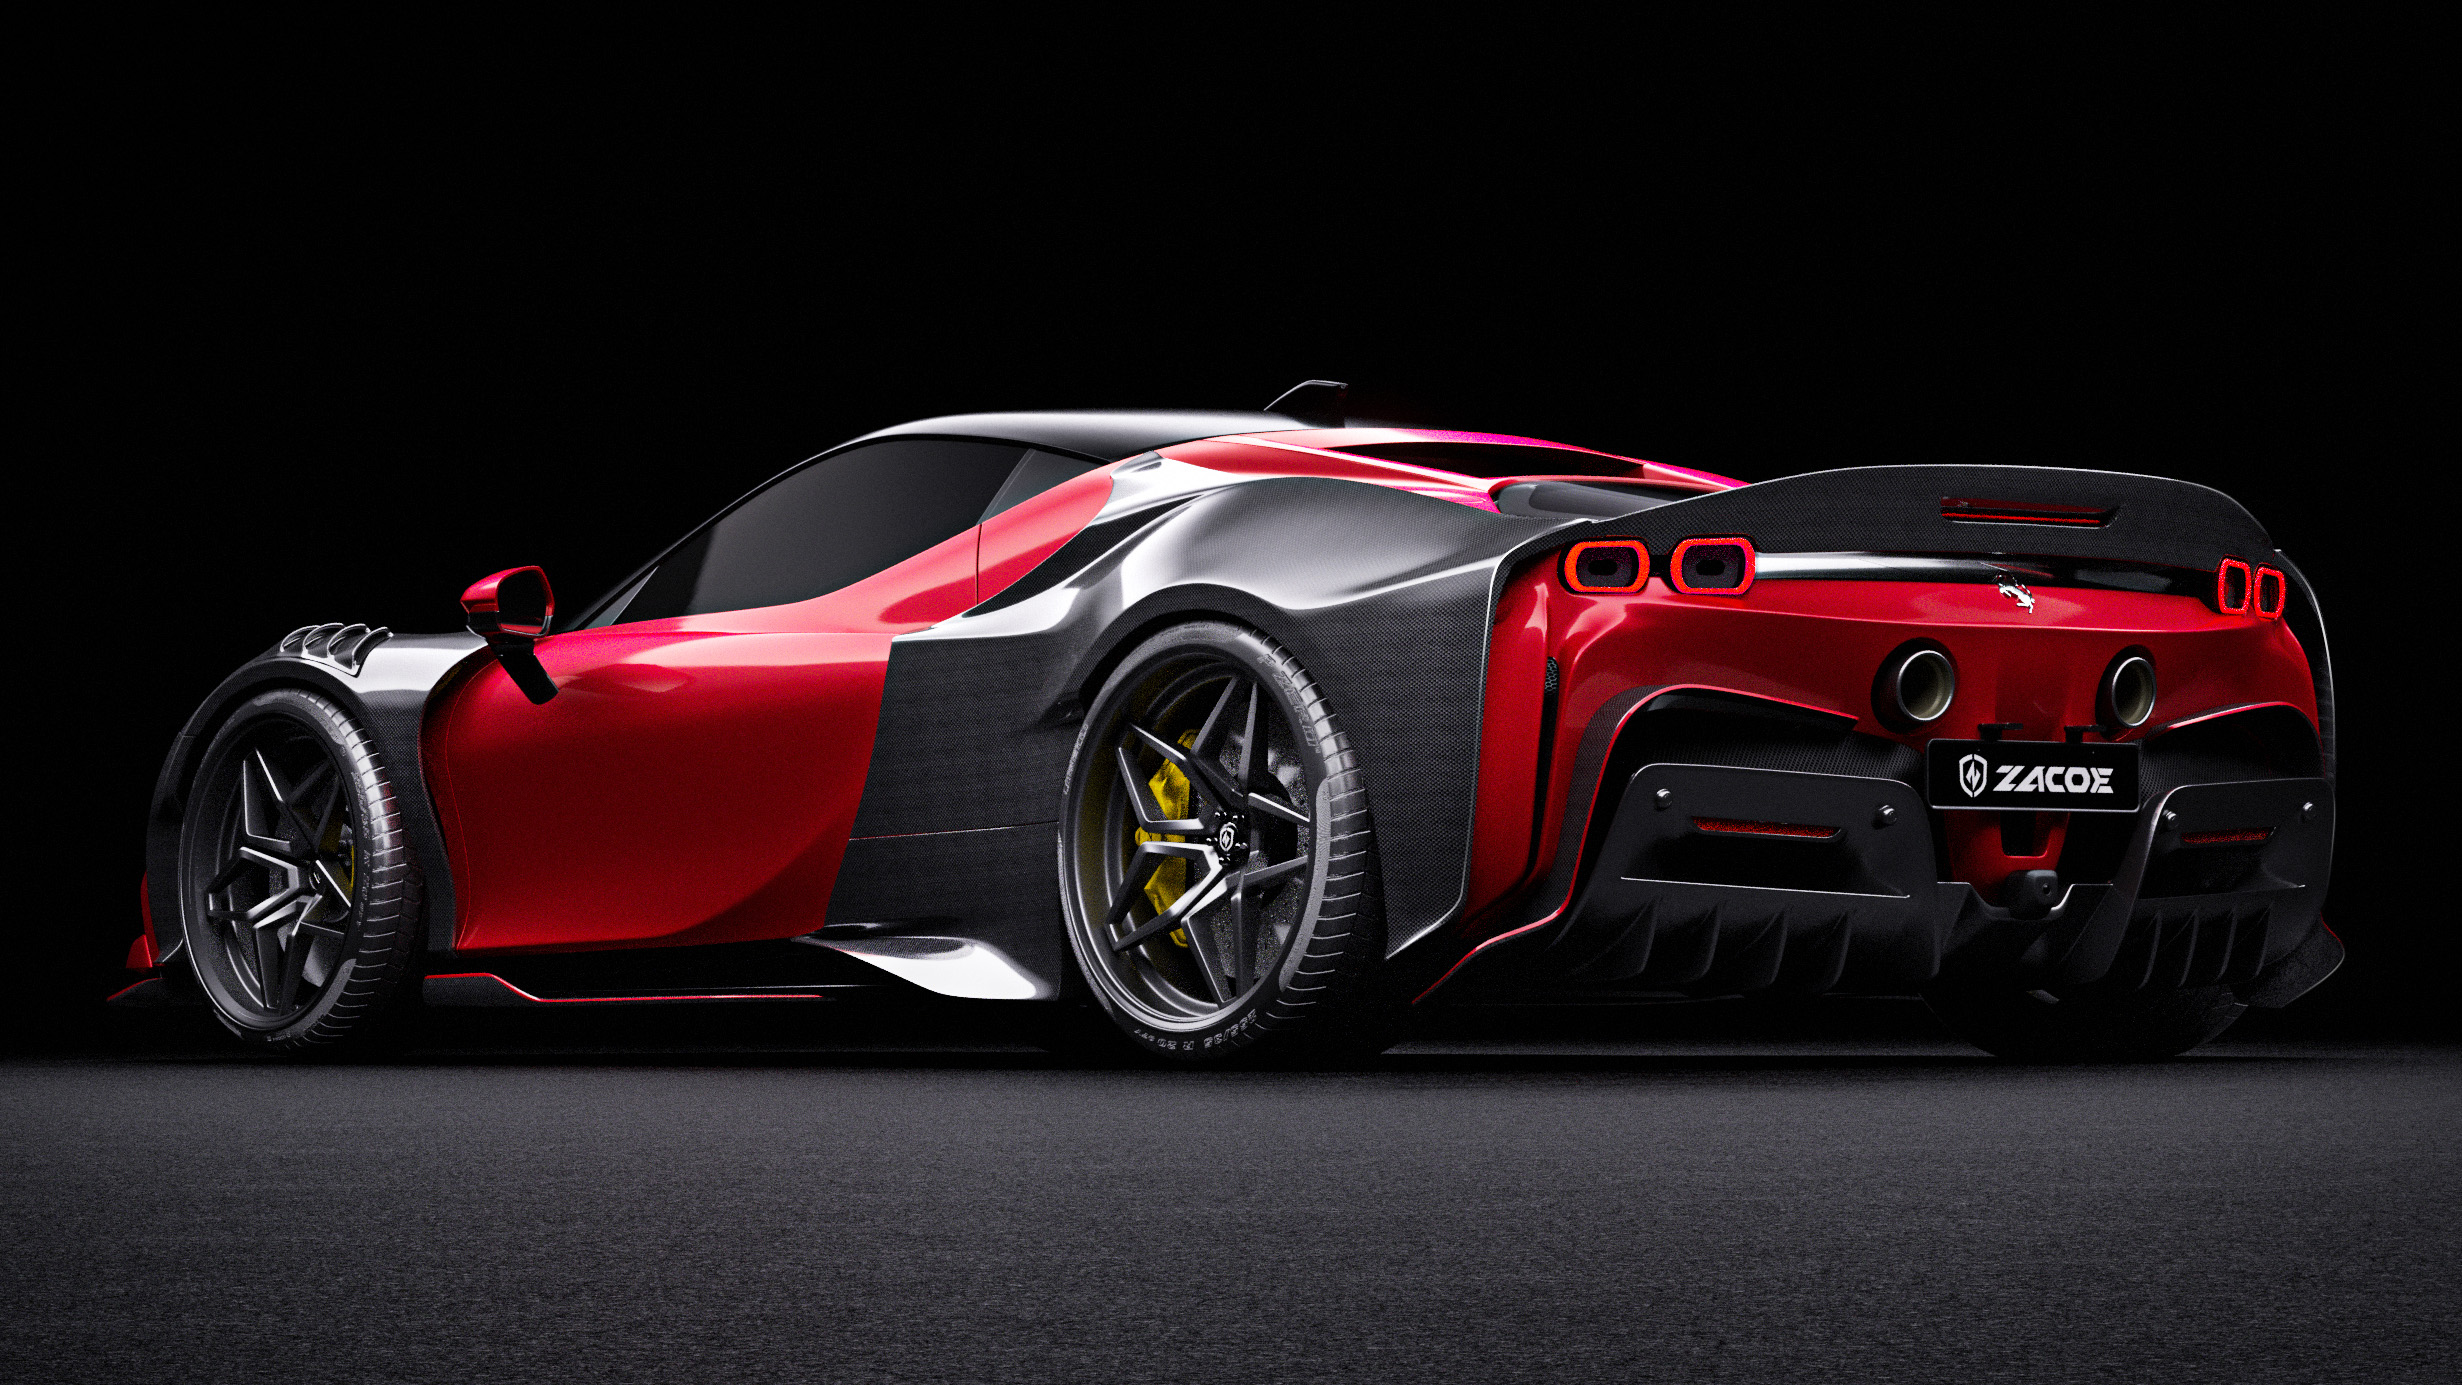 zacoe’s carbon fibre widebody kit for the ferrari sf90 is quite... something